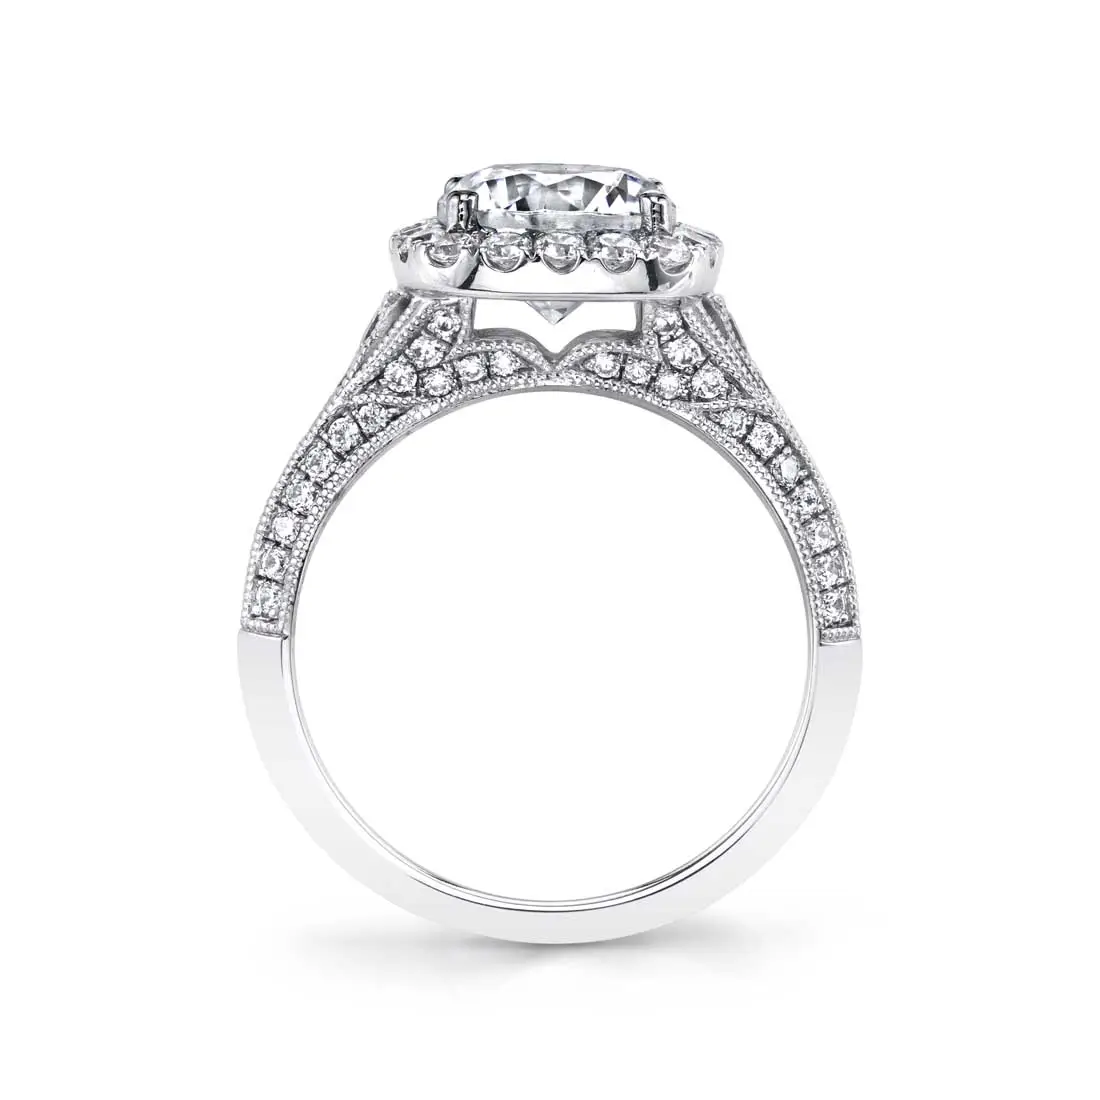 Oval Cut Unique Halo Engagement Ring - Naomi